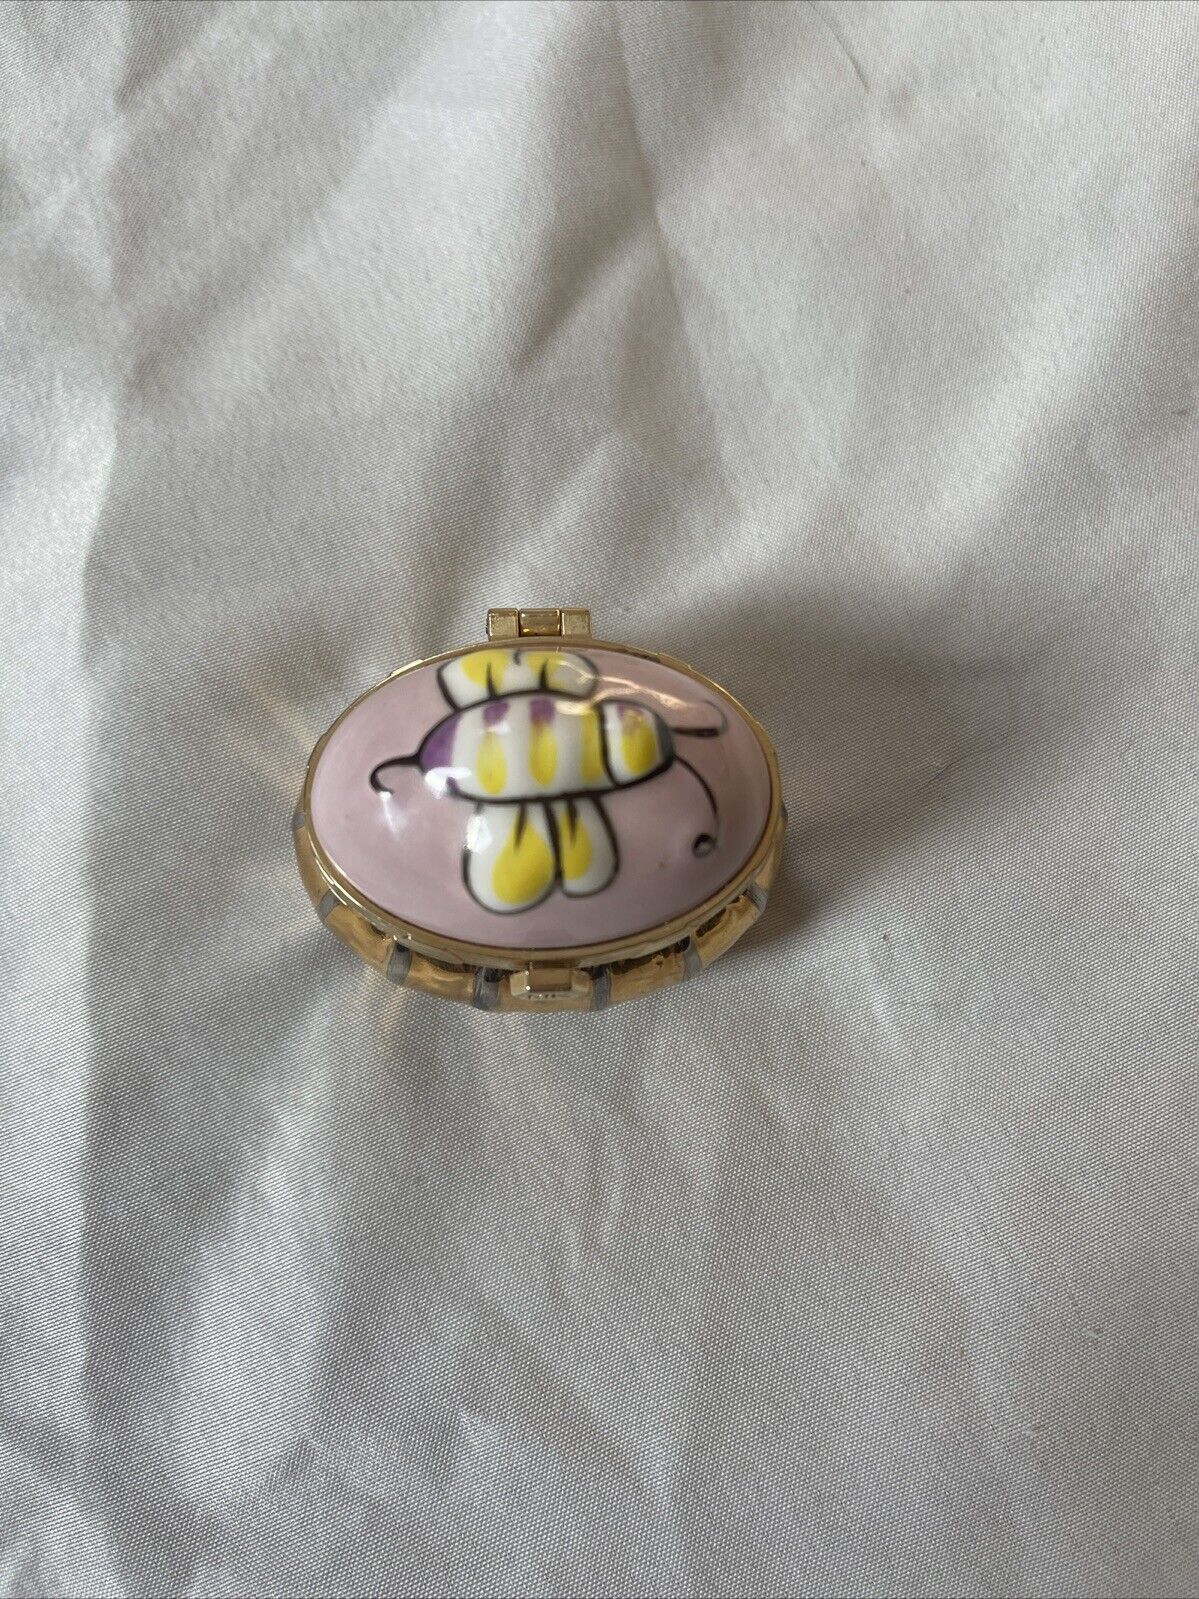 Mary Kay Bumble Bee Oval Trinket Box Pink With Gold Color Lower Half